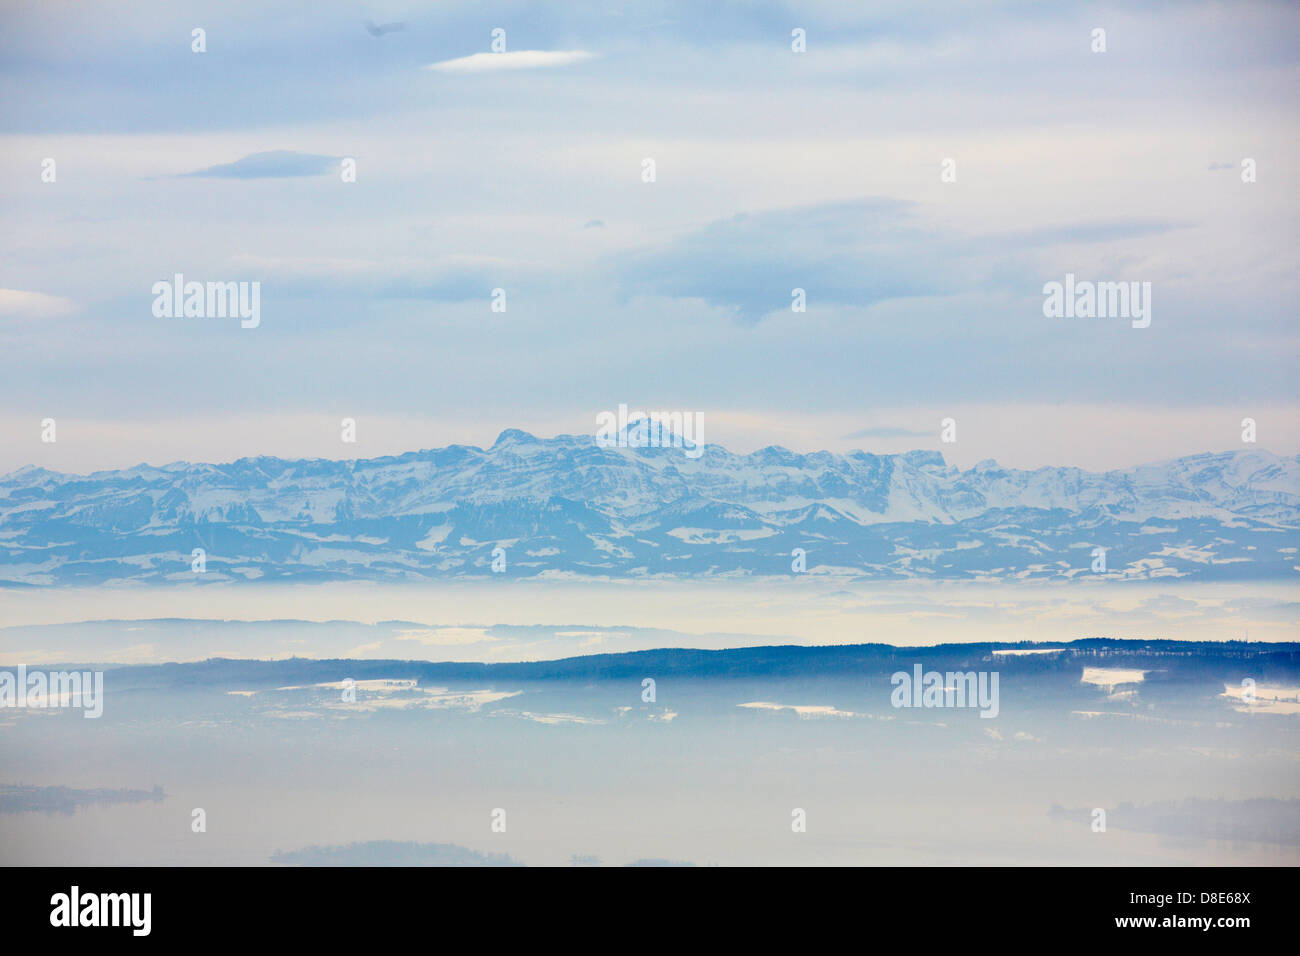 Swiss Alps and Lake Constance, Germany, Europe Stock Photo